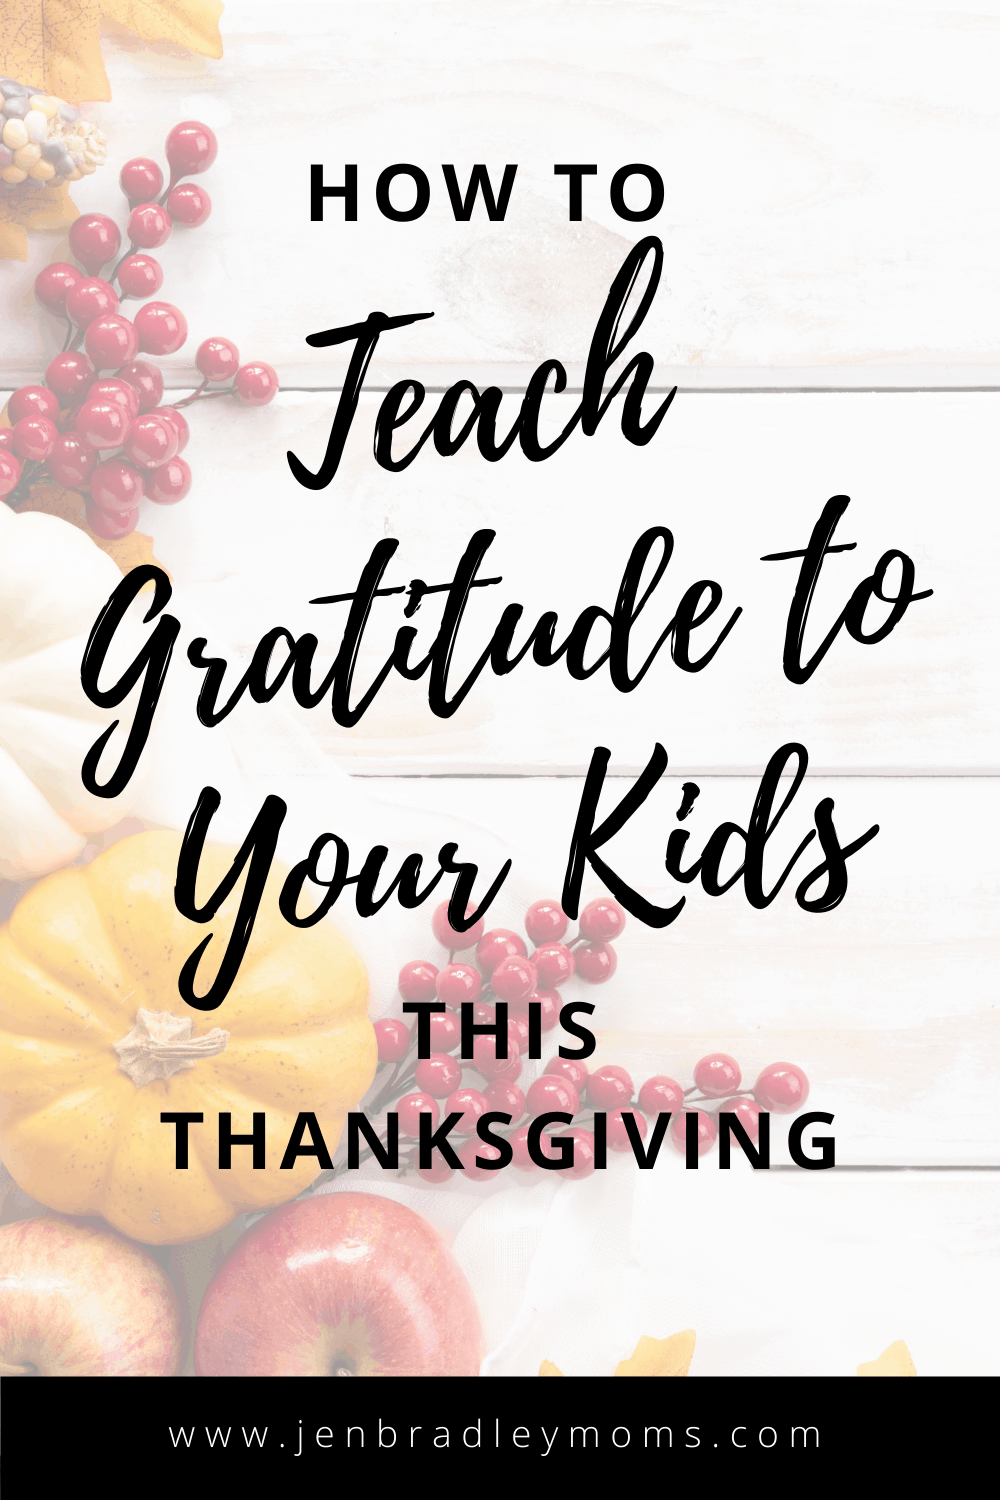 How to Teach Gratitude to Your Kids